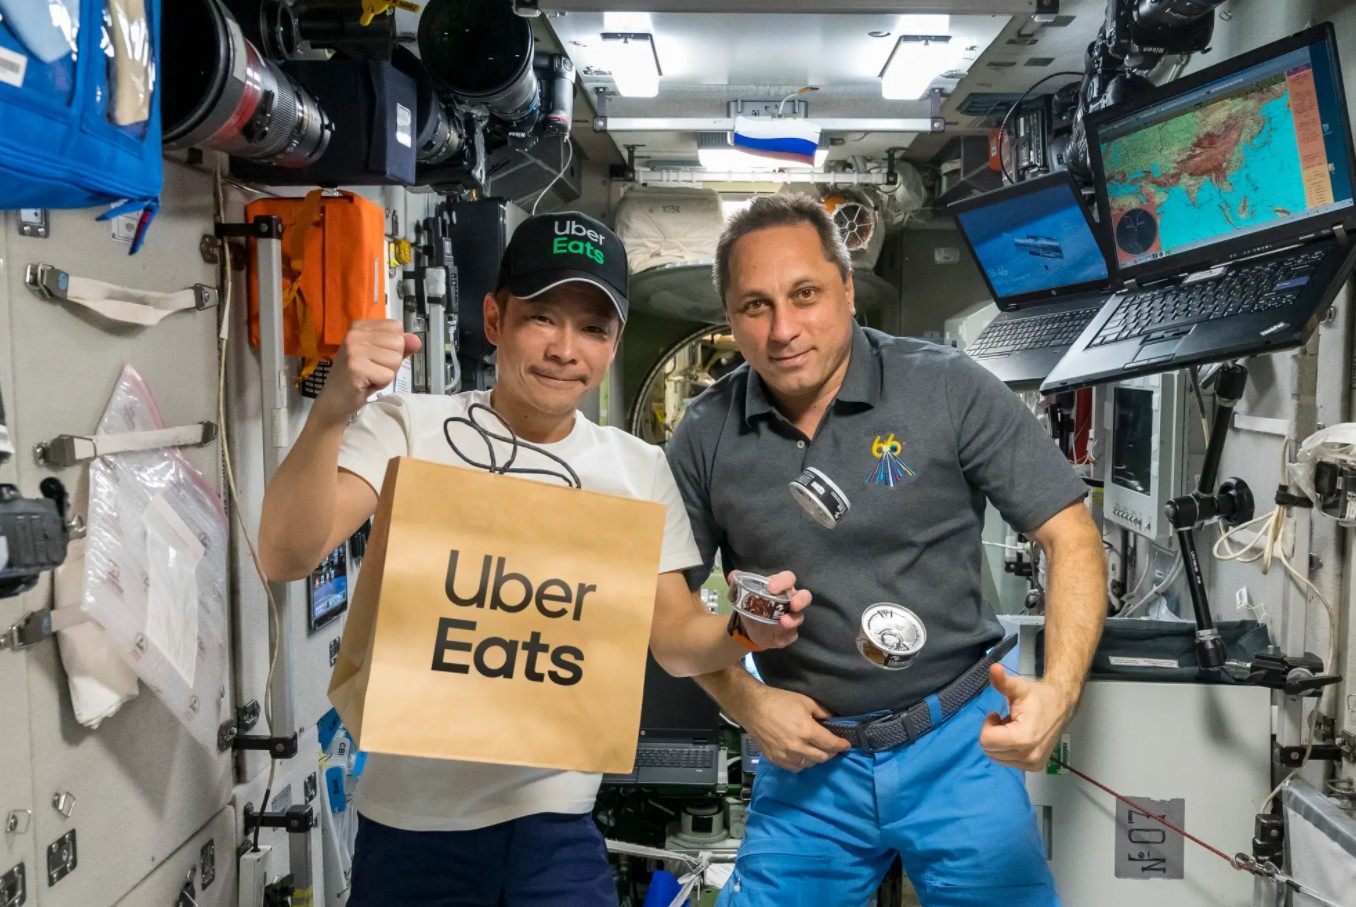 Yusaku Maezawa aboard the International Space Station: The Japanese billionaire who “paid US$80 million” to deliver canned food to space. Photo: Uber Eats